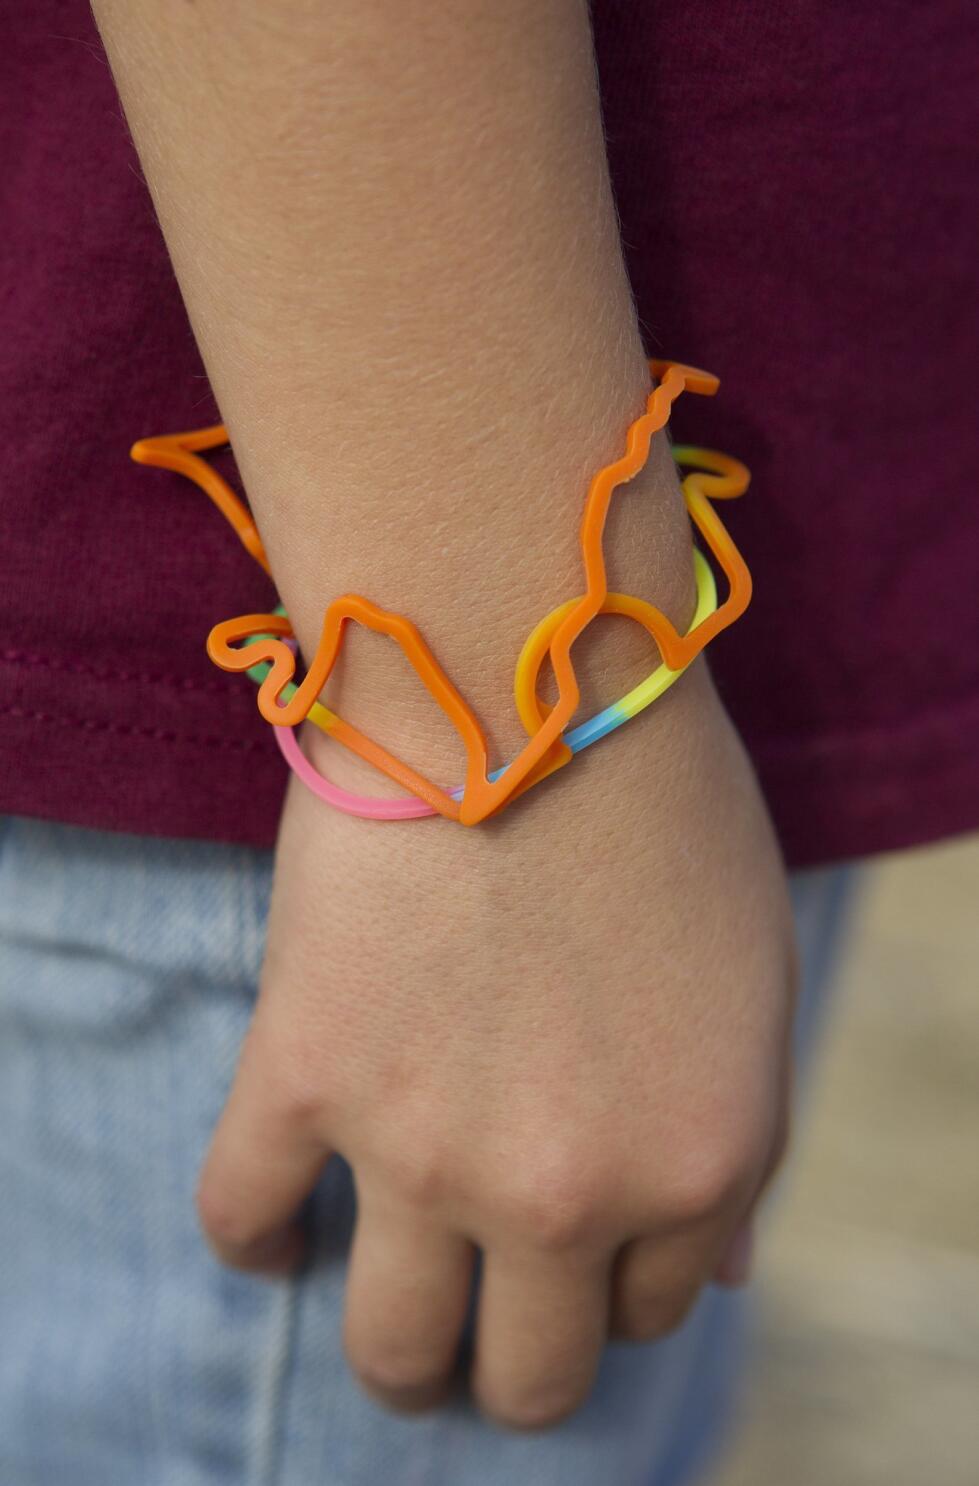 Silly Bandz: The hottest thing in class